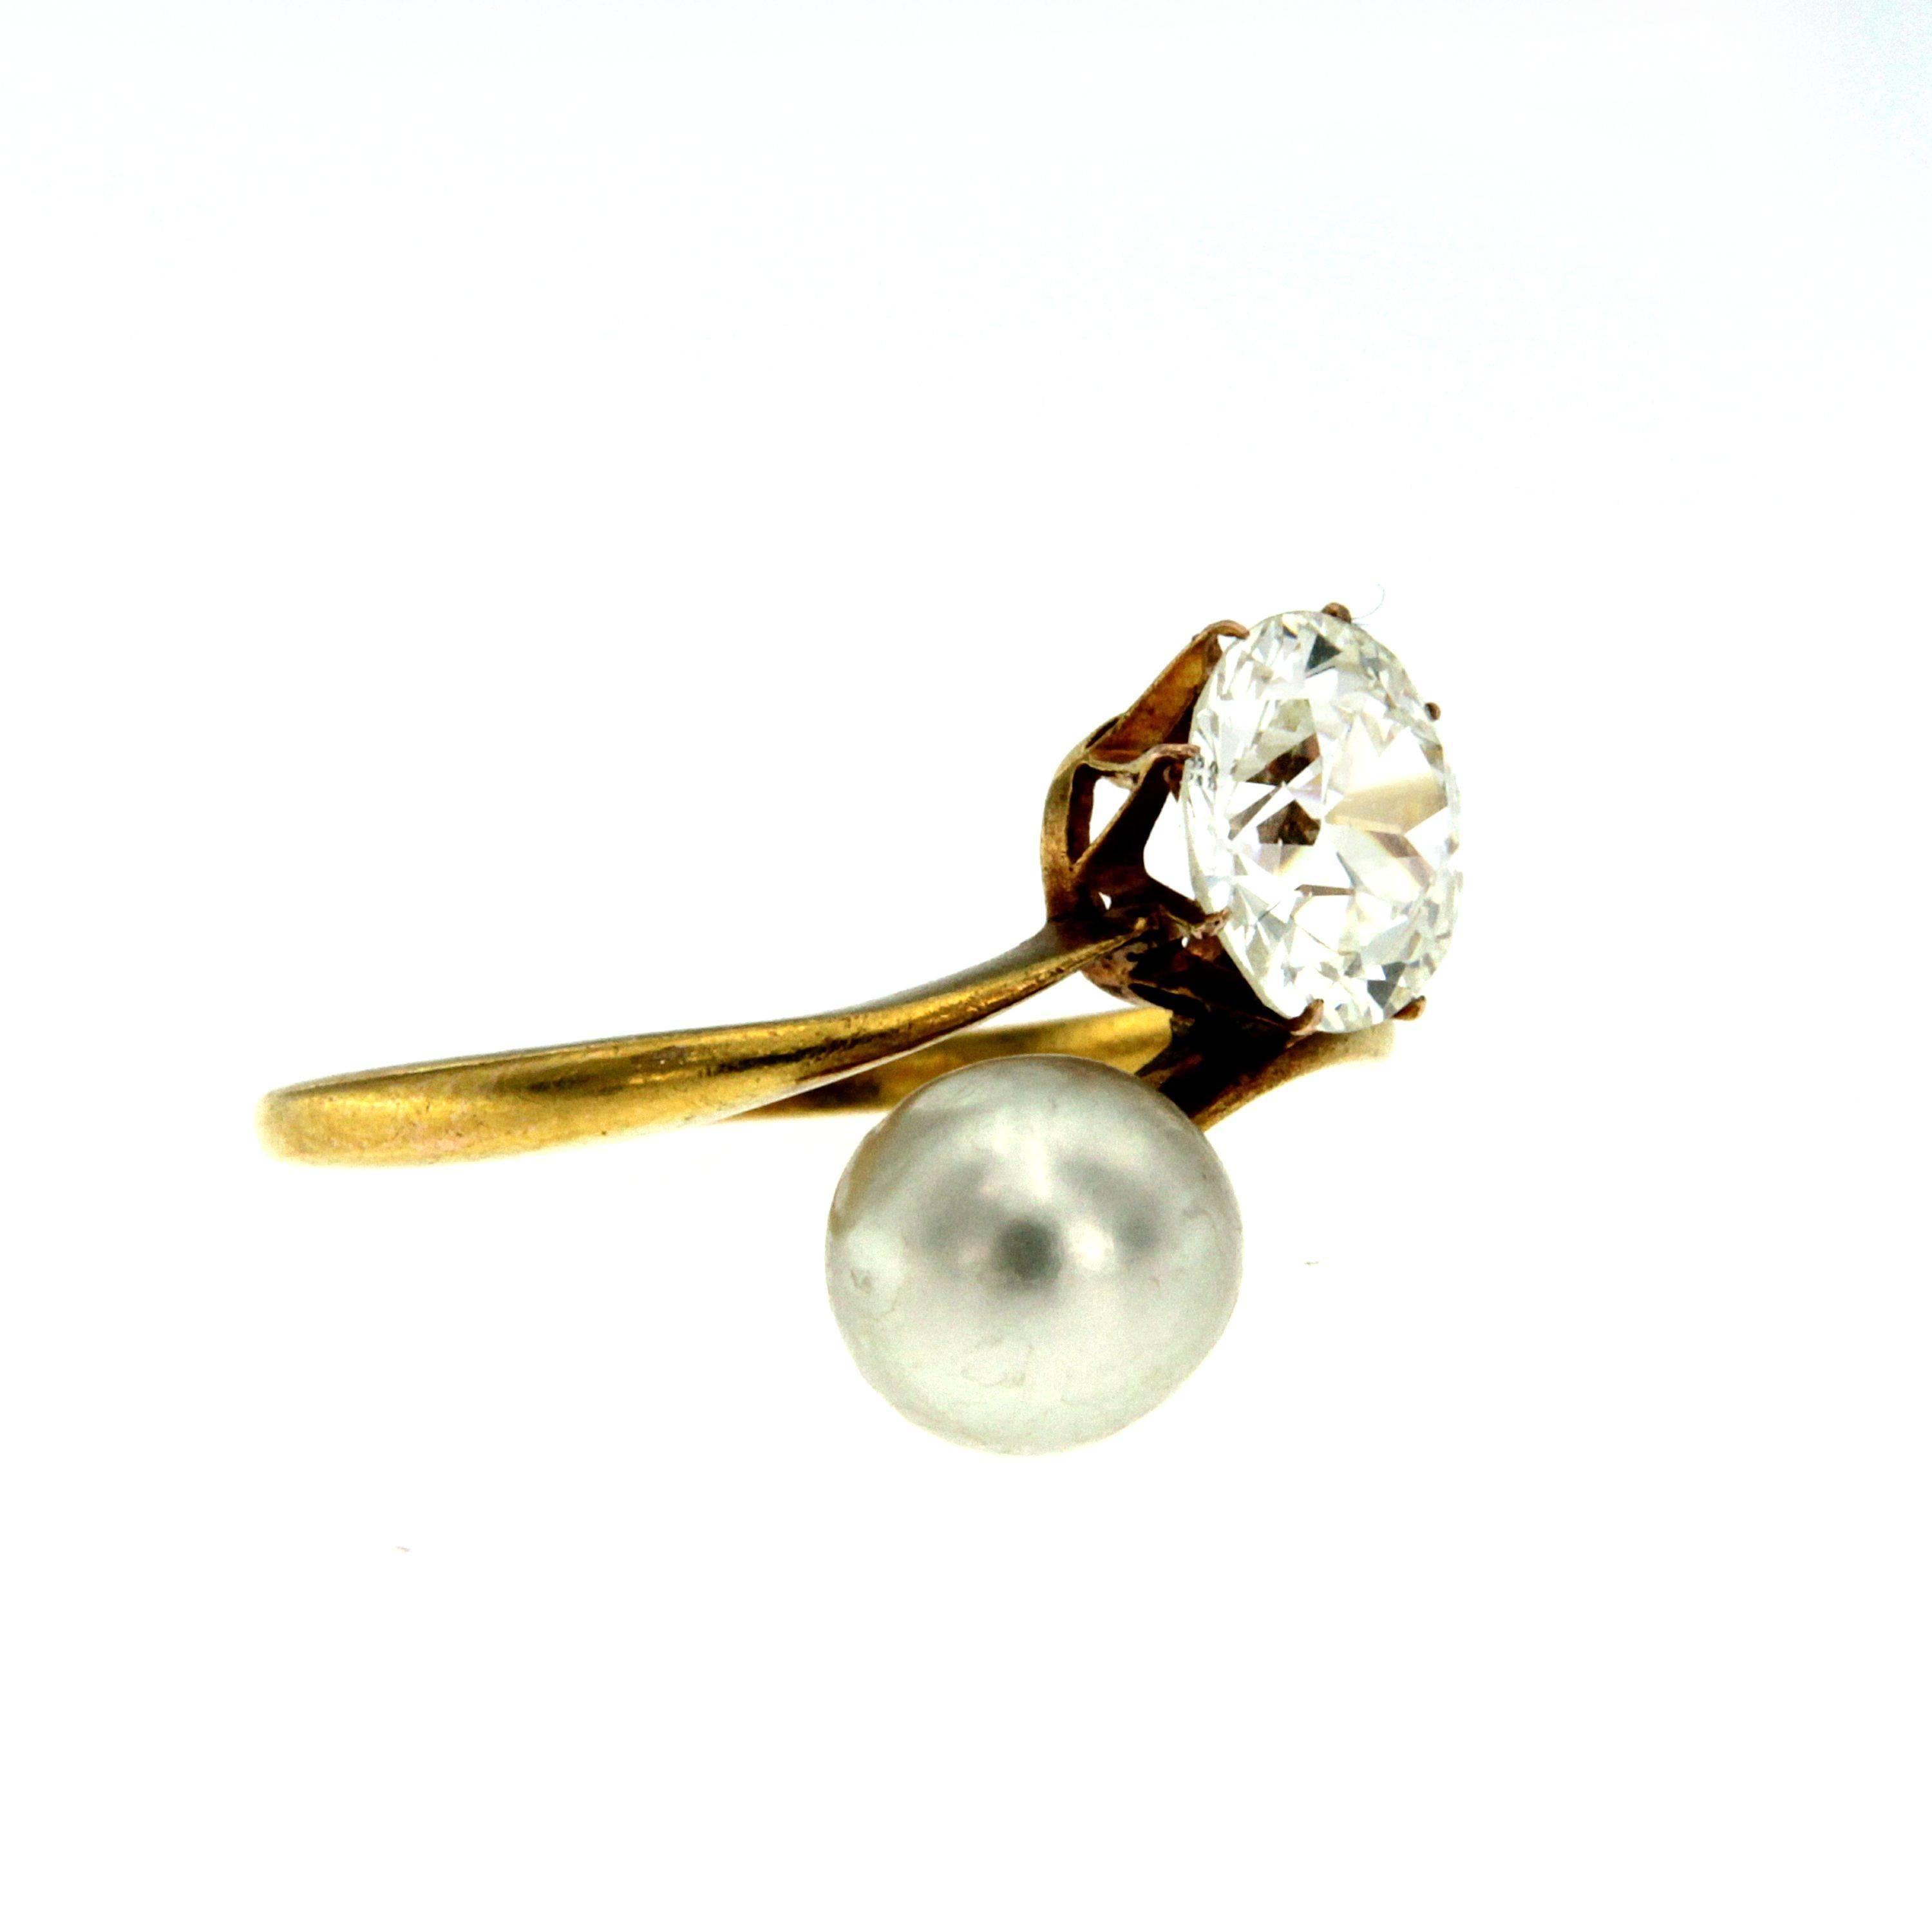 Elegant and stunning 18k rose gold 'Vous et Moi' ring set with an Old Mine Cut Diamond weighing 2 carat I color Vs1 clarity and a south sea pearl 8mm. Circa 1920

CONDITION: Pre-owned - Excellent 
METAL: 18k Gold 
GEM STONE: Diamond 2 carat - South